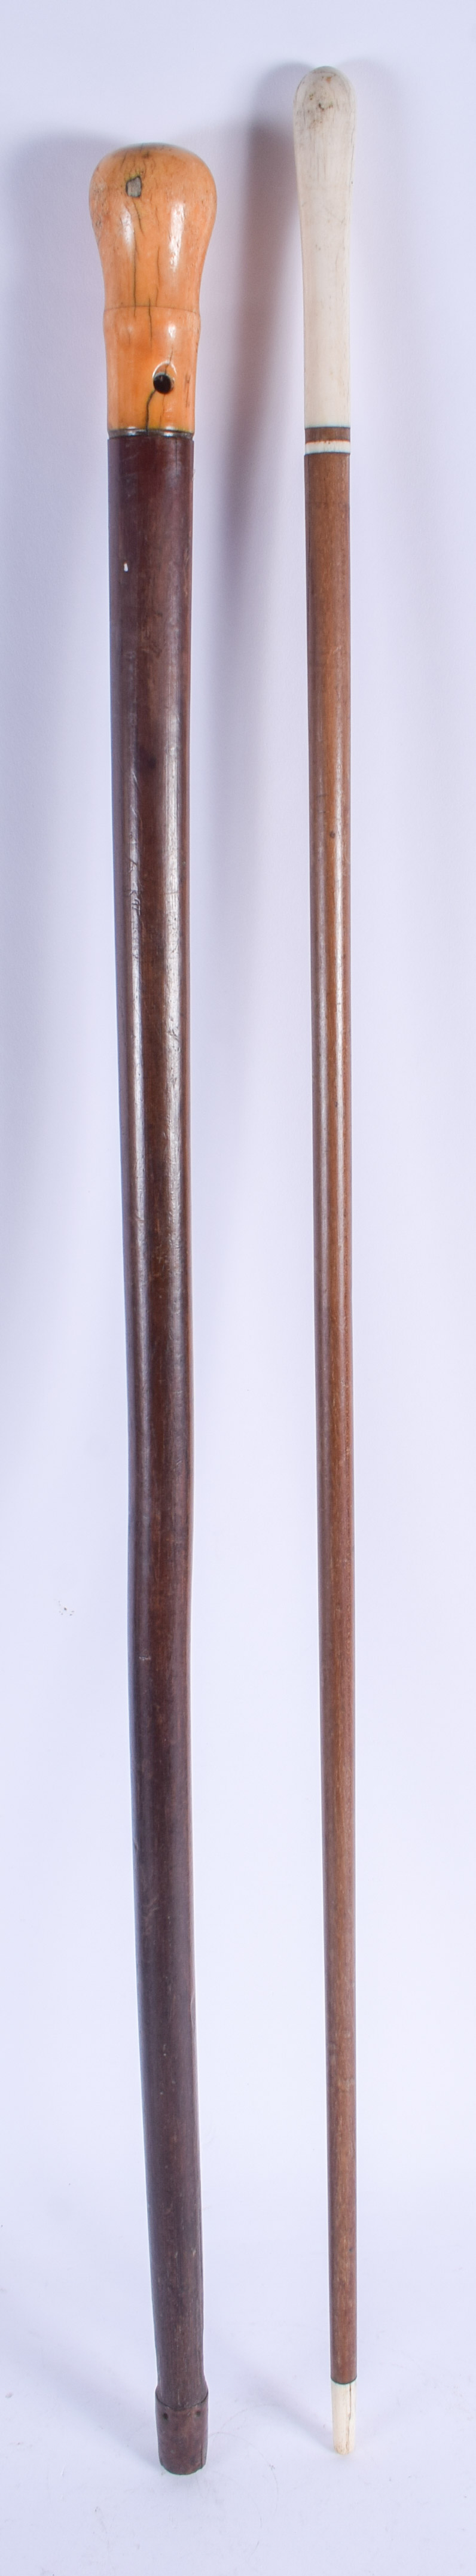 A LATE 18TH CENTURY IVORY HANDLED CANE together with another. 84 cm long. (2) - Image 3 of 3